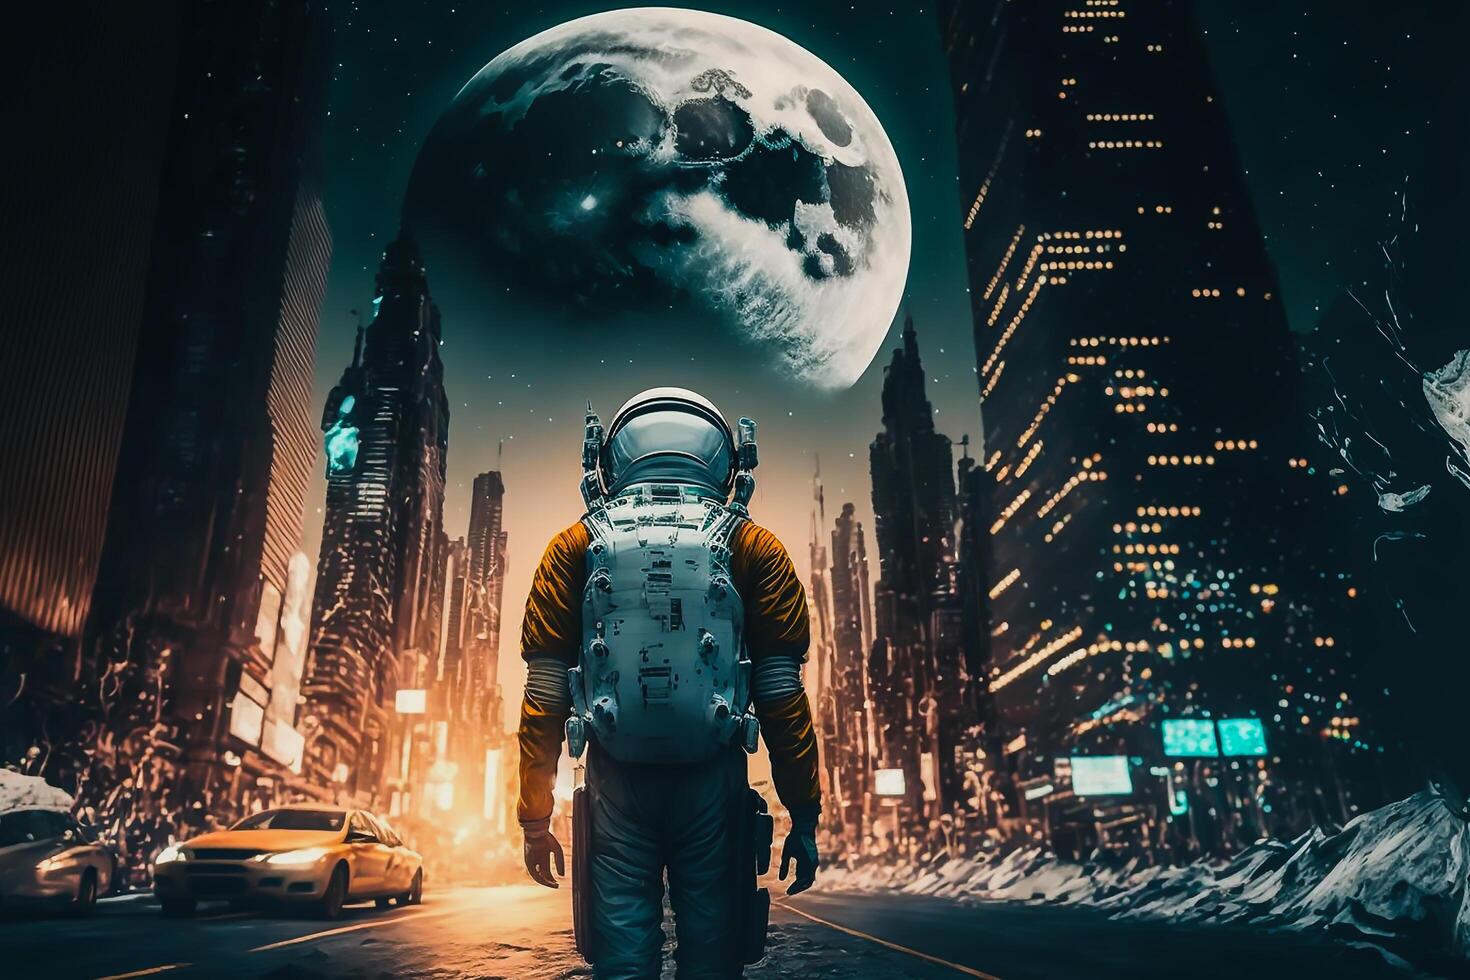 futuristic astronaut standing on the moon with new town, photo